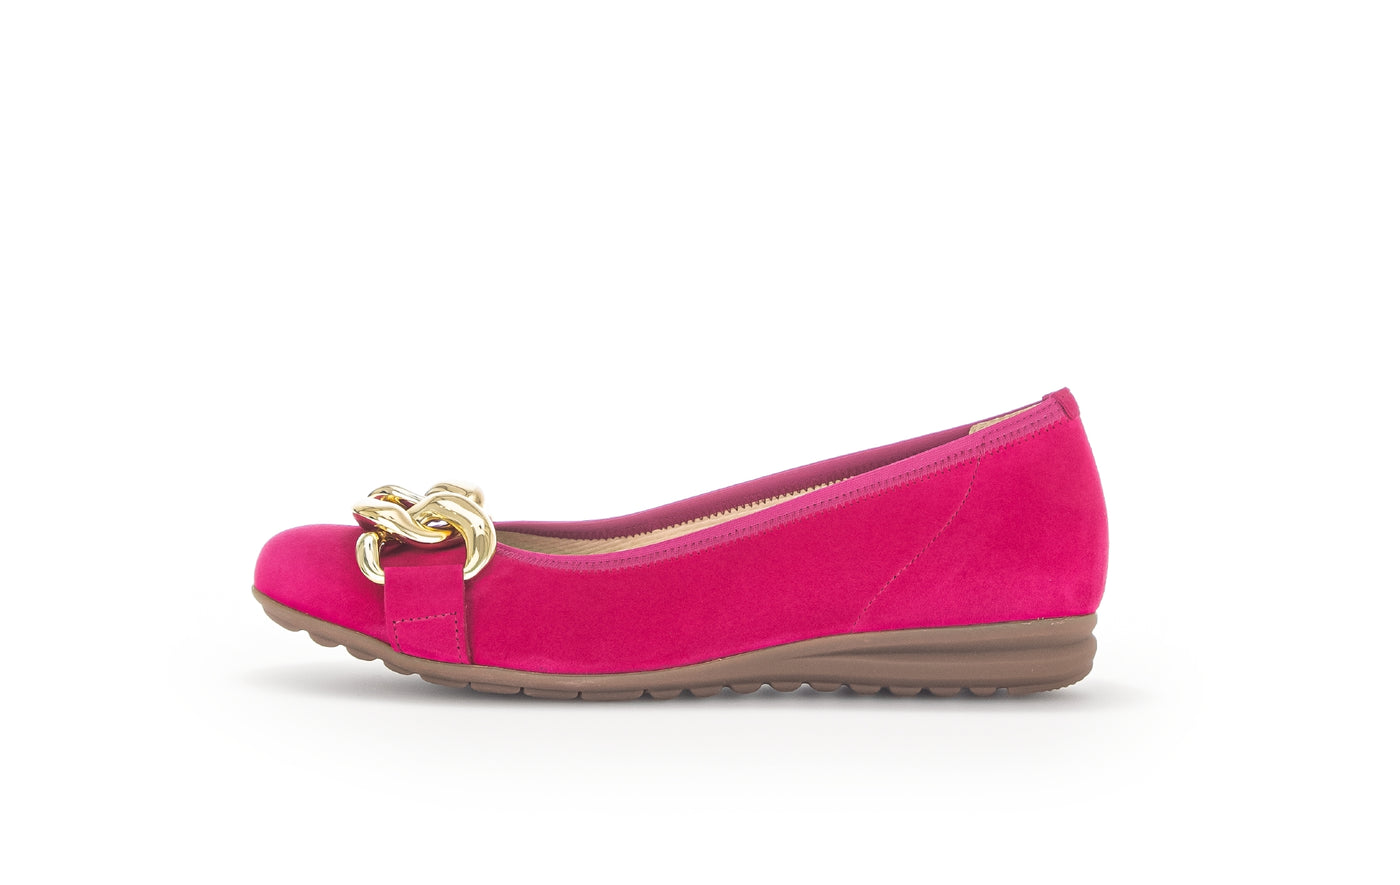 GABOR - 42.625.21 FLAT SHOE WITH CHAIN DETAIL - PINK SUEDE